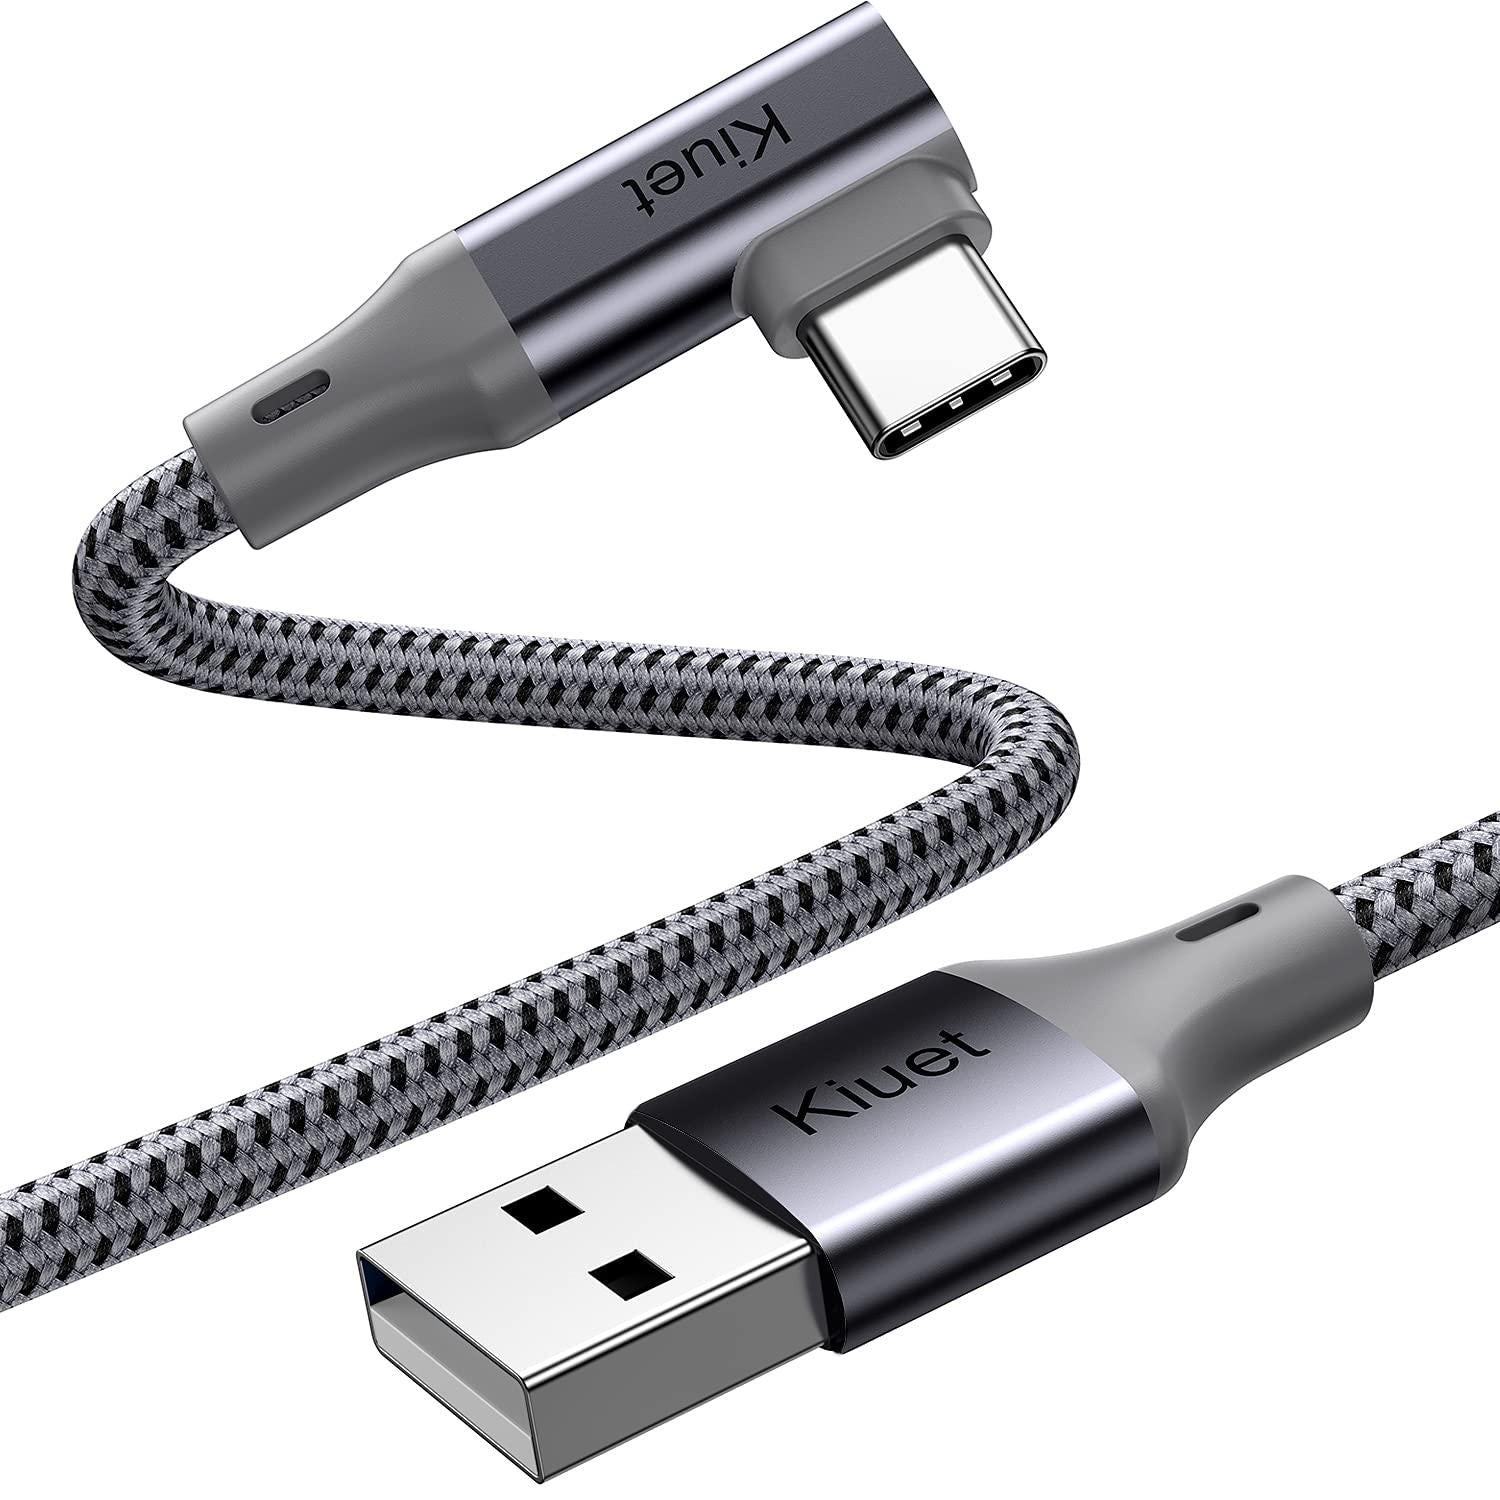 ZHDZSW, Long USB C Cable 3M, 90 Degree Angle 3.1A Type C Charger Cable Fast Charging, USB C Charger Cable Braided for SamsungGalaxy S20 S10 S9 S8, Huawei, Google Pixel, Sony Xperia, LG Fire HD 10 etc